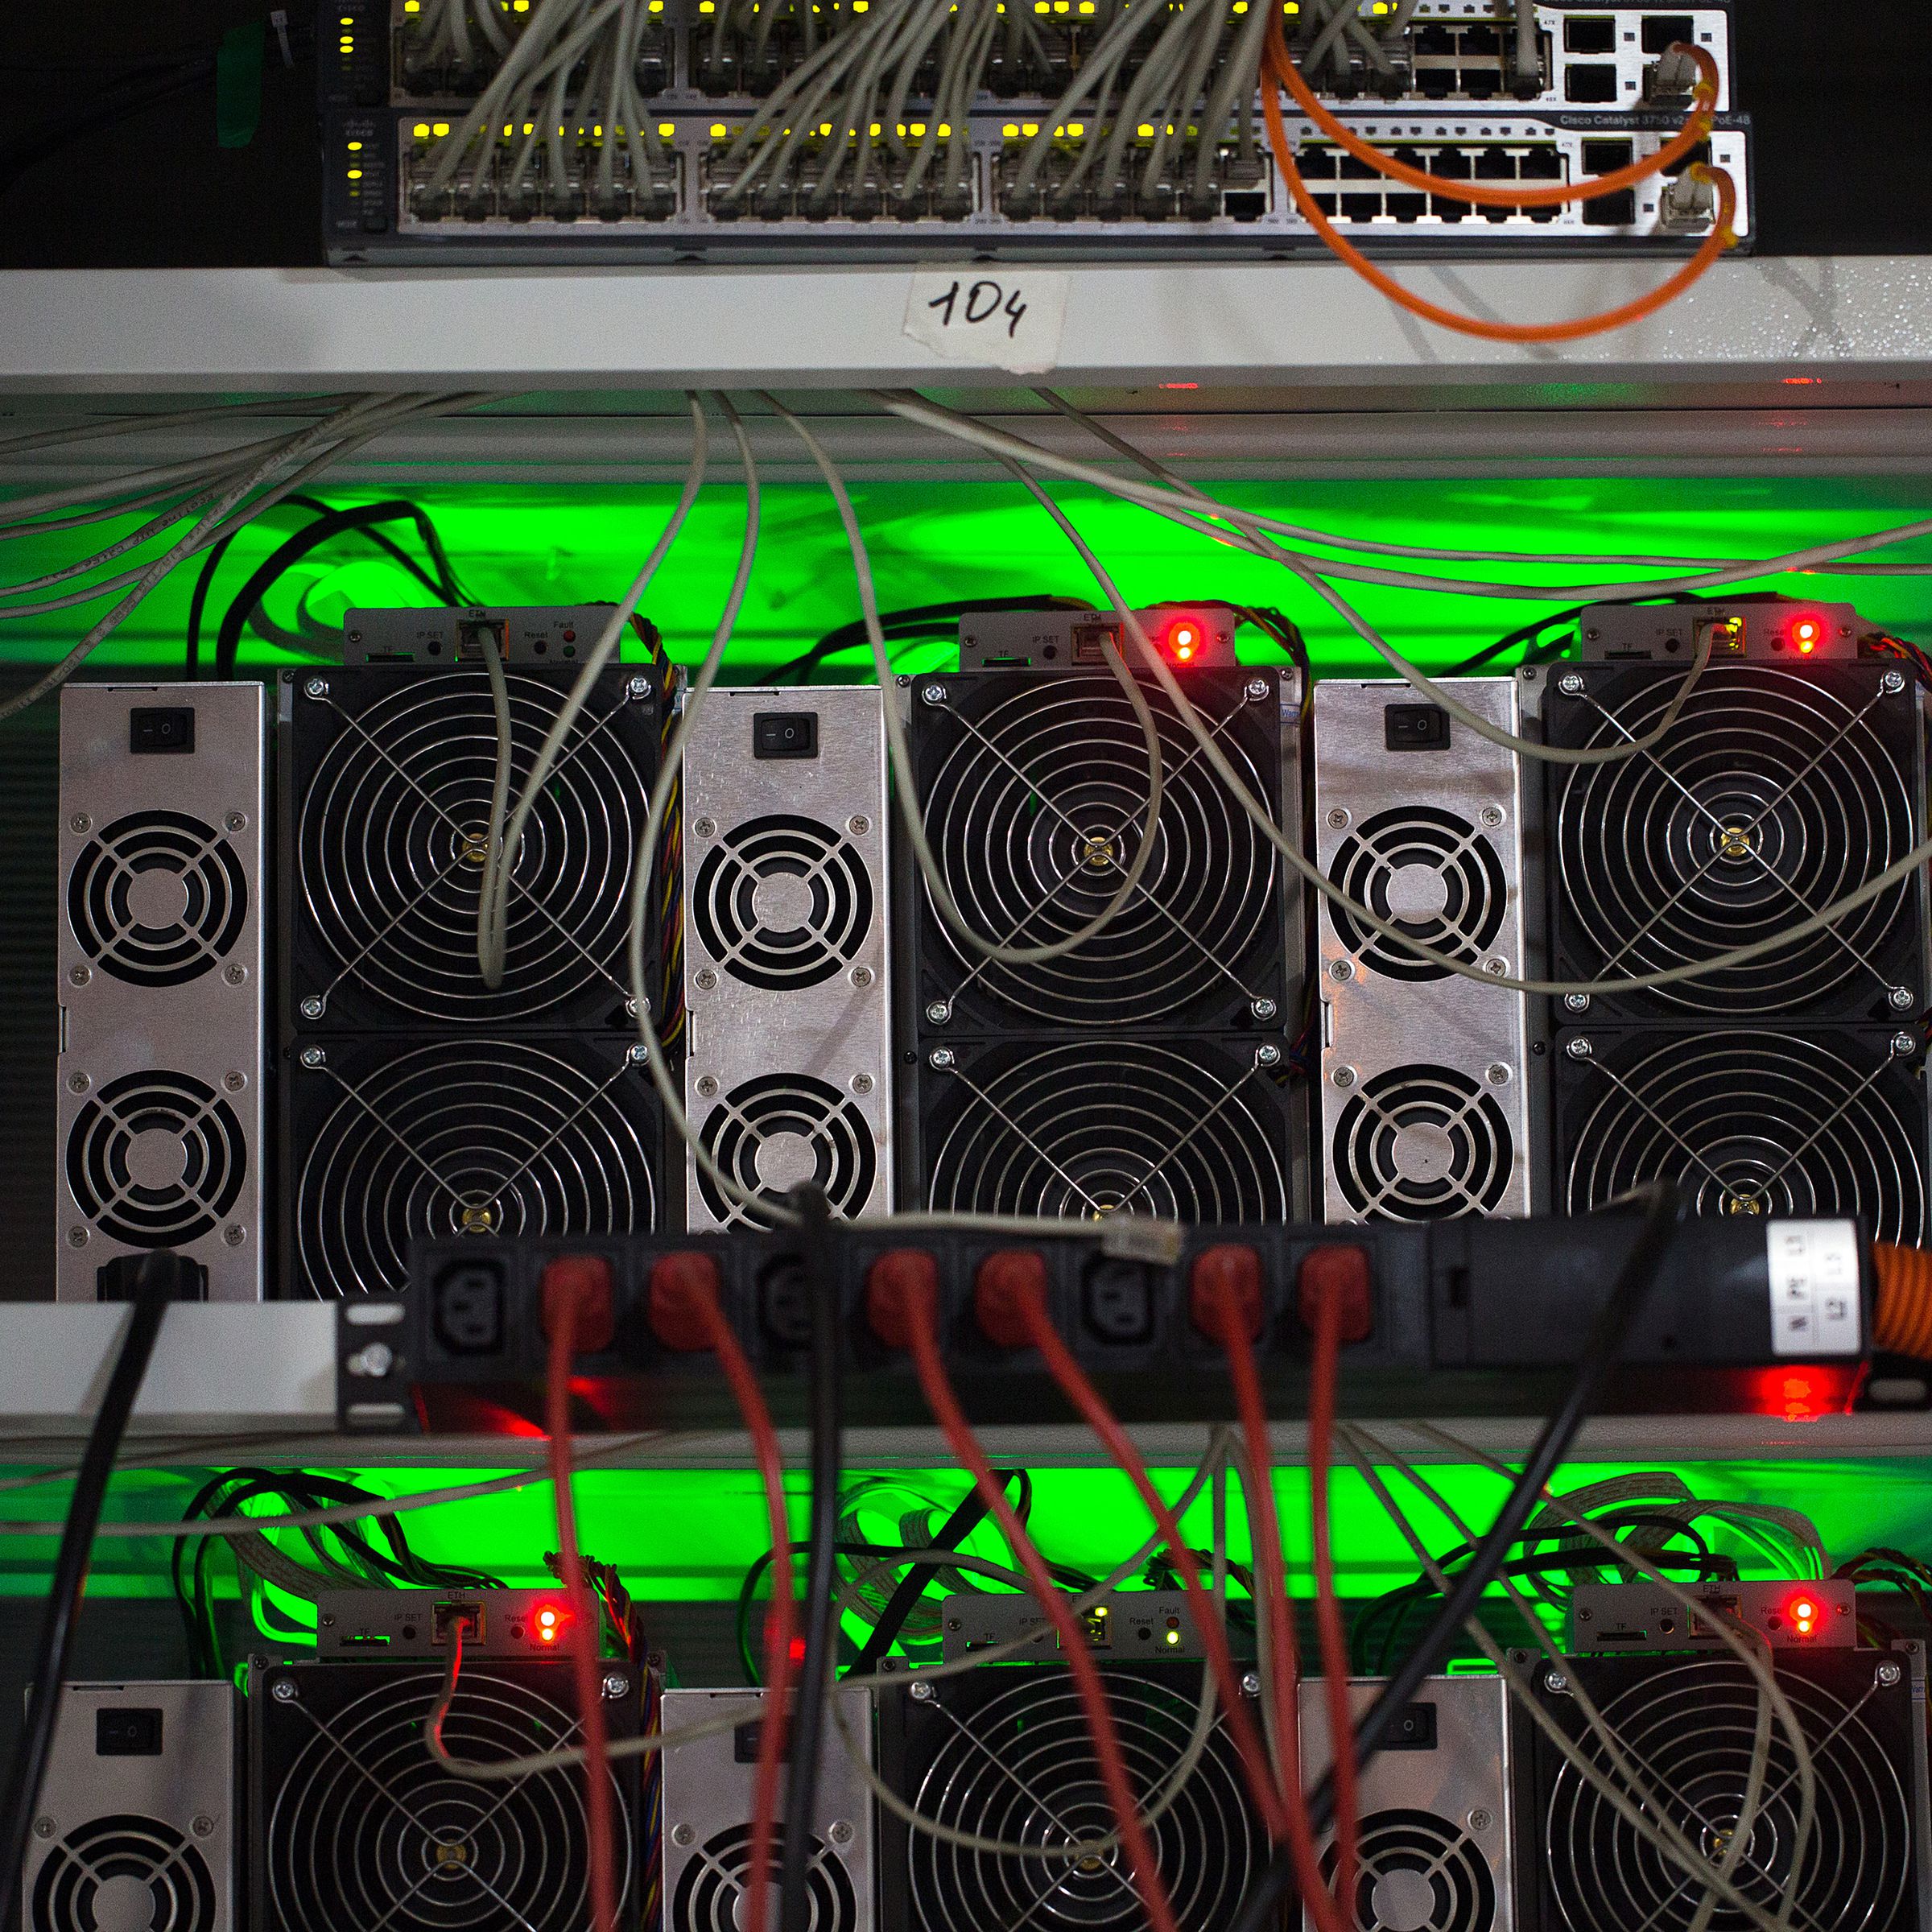 Wires stick out of specialized computers for Bitcoin mining glowing with green light